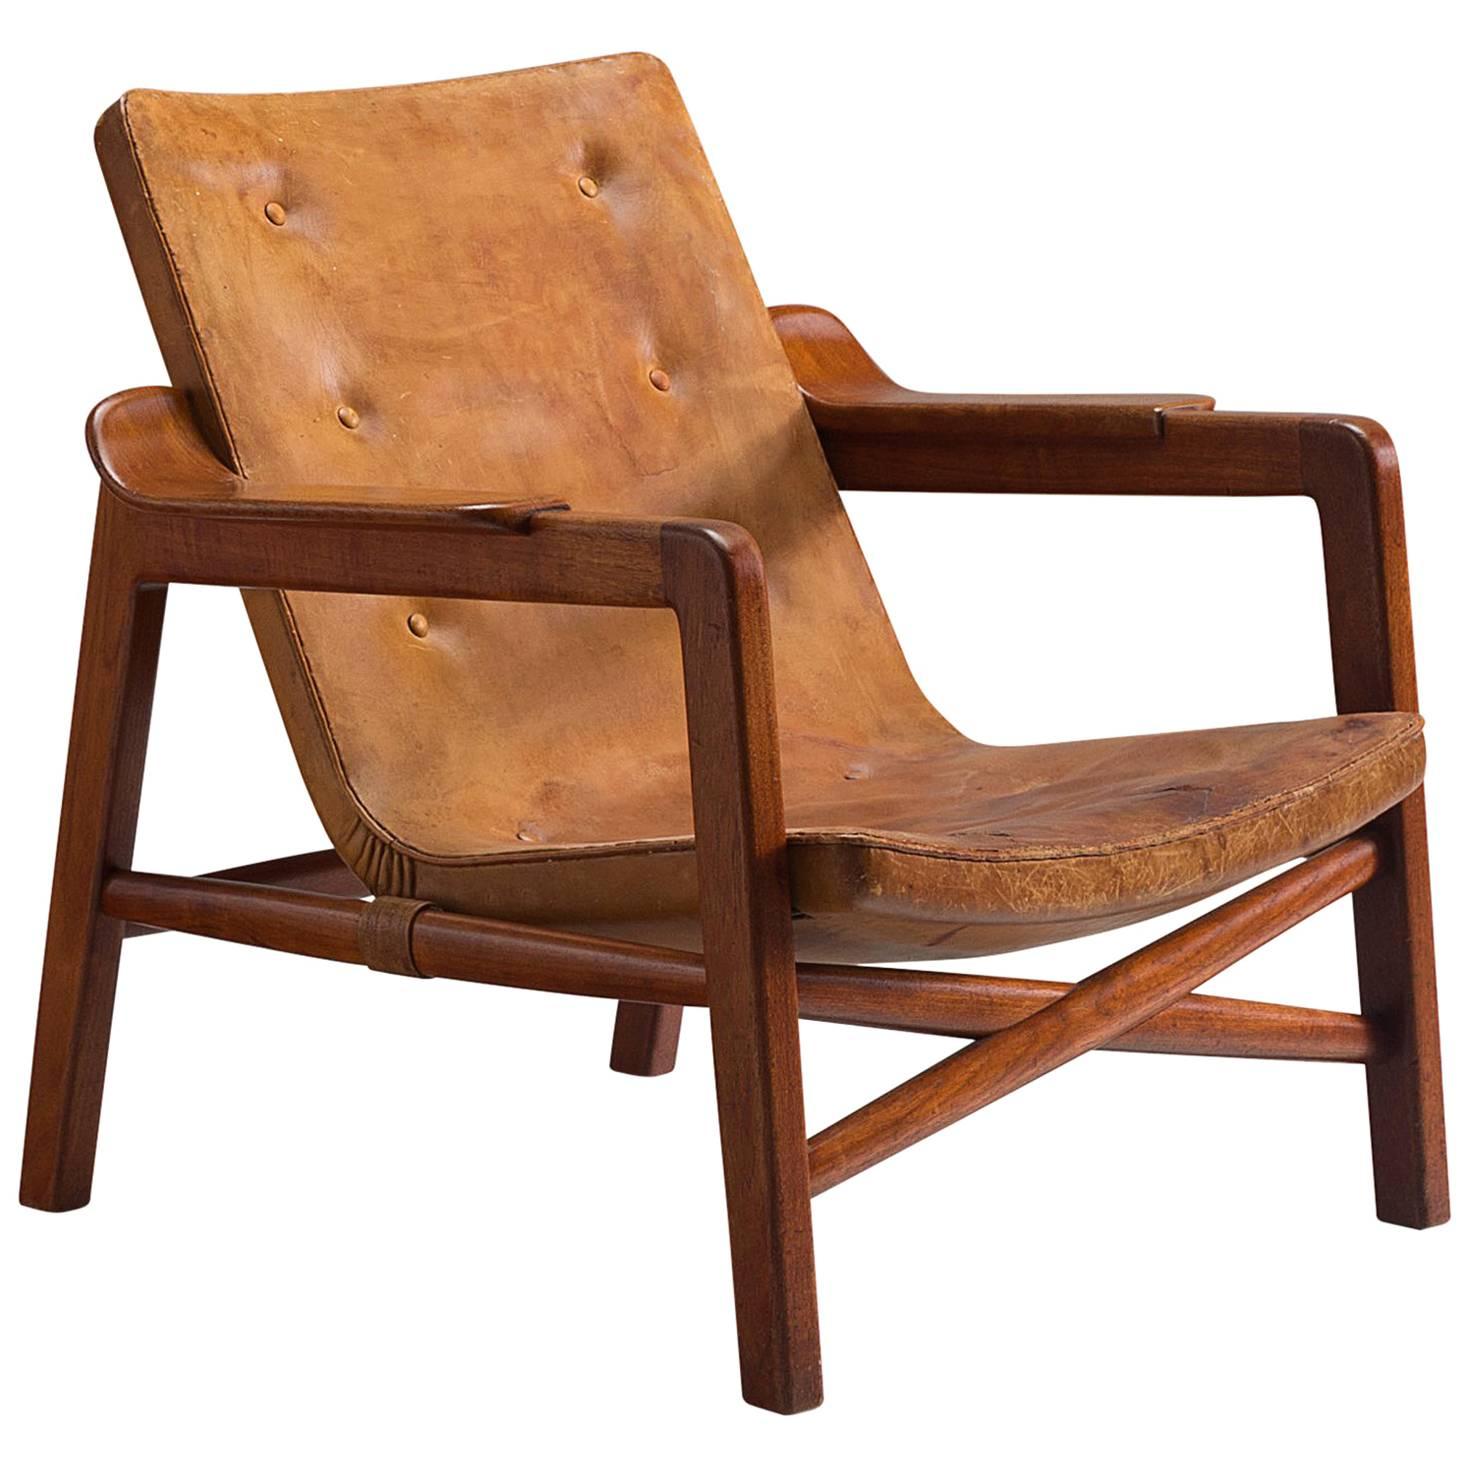 Early 1940s Kindt-Larsen 'Fireplace Chair' in Original Leather